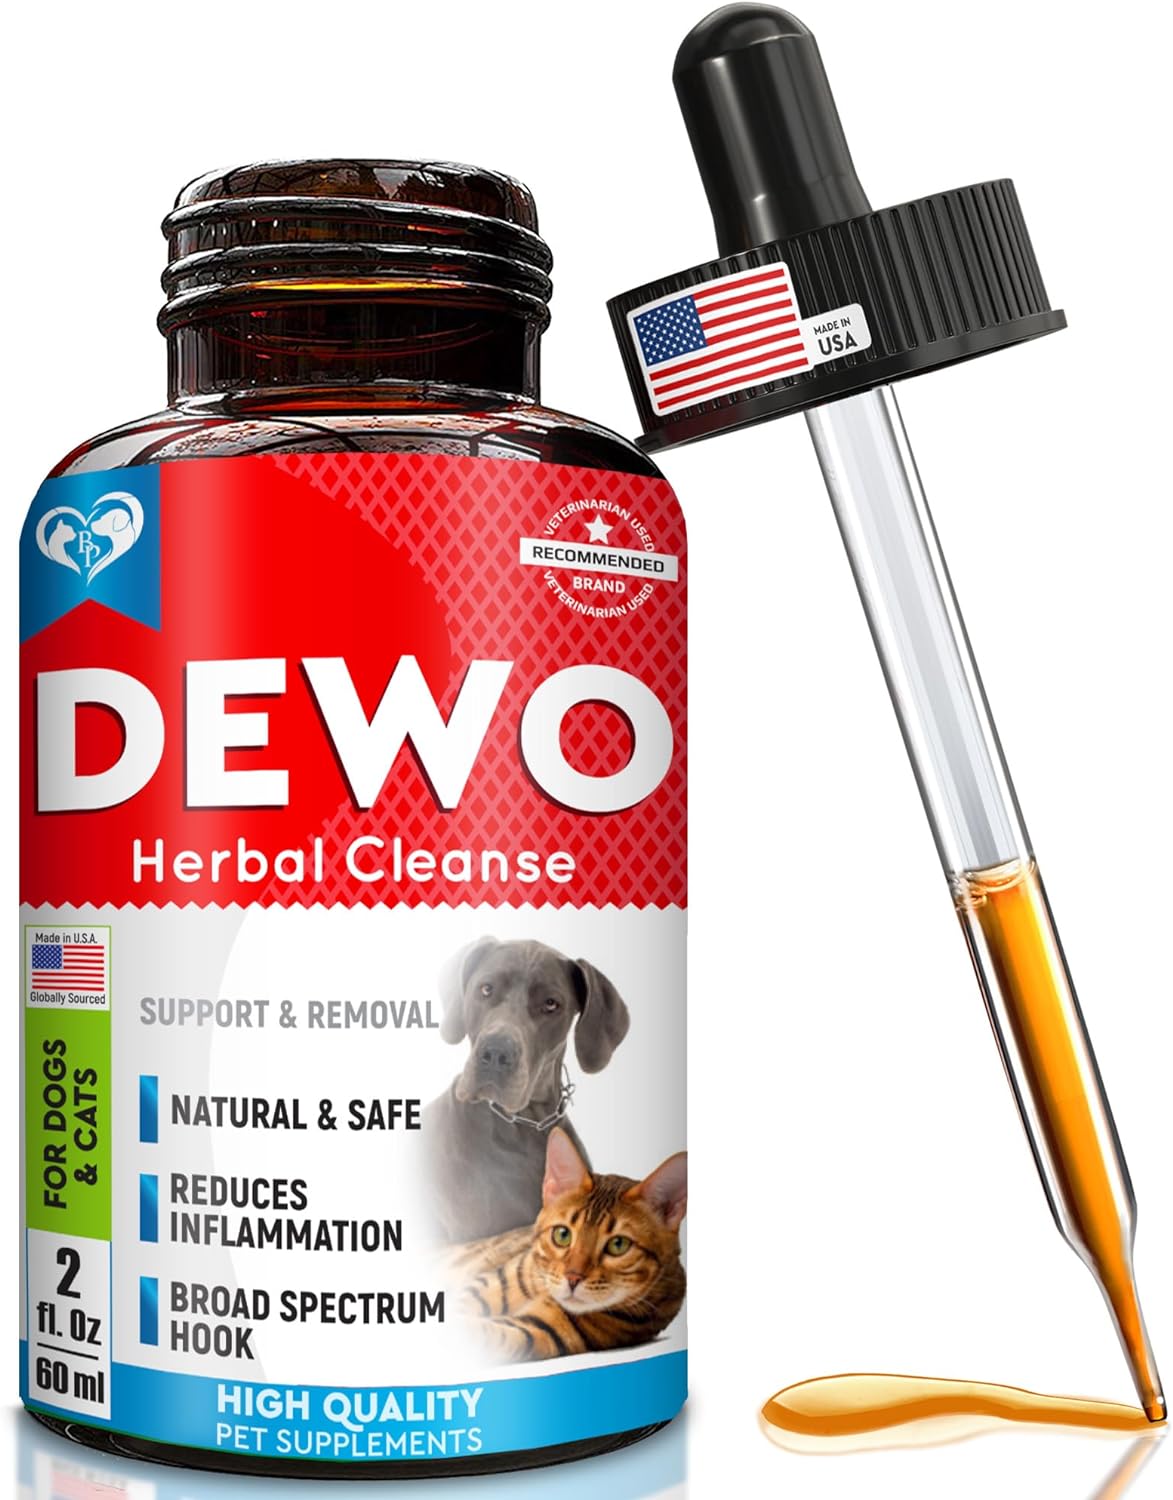 Dewo Herbal Cleanse for Cats & Dogs